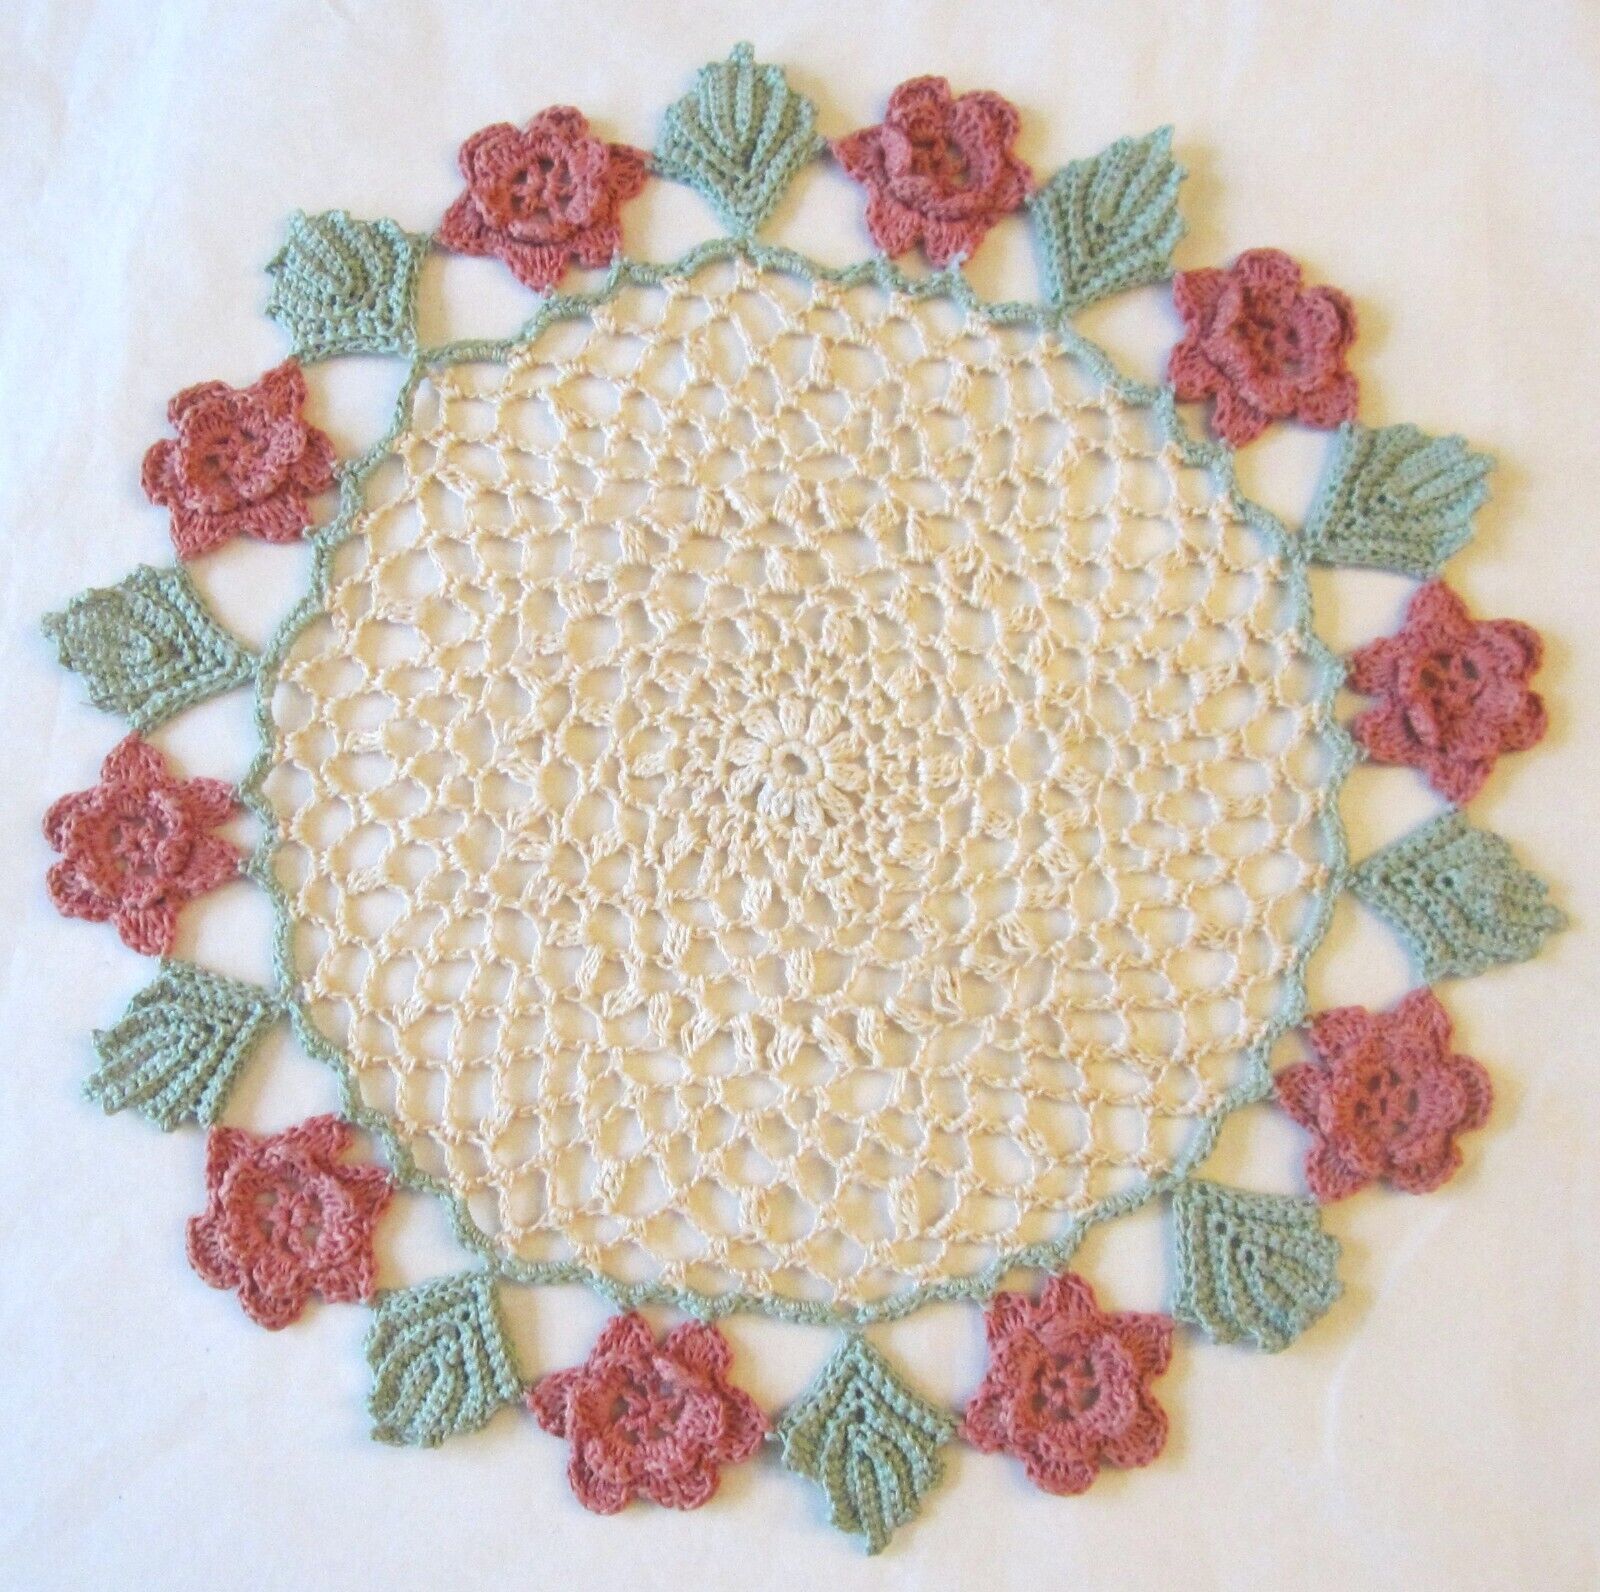 Starched Rosetta 10 inch Vintage Doily